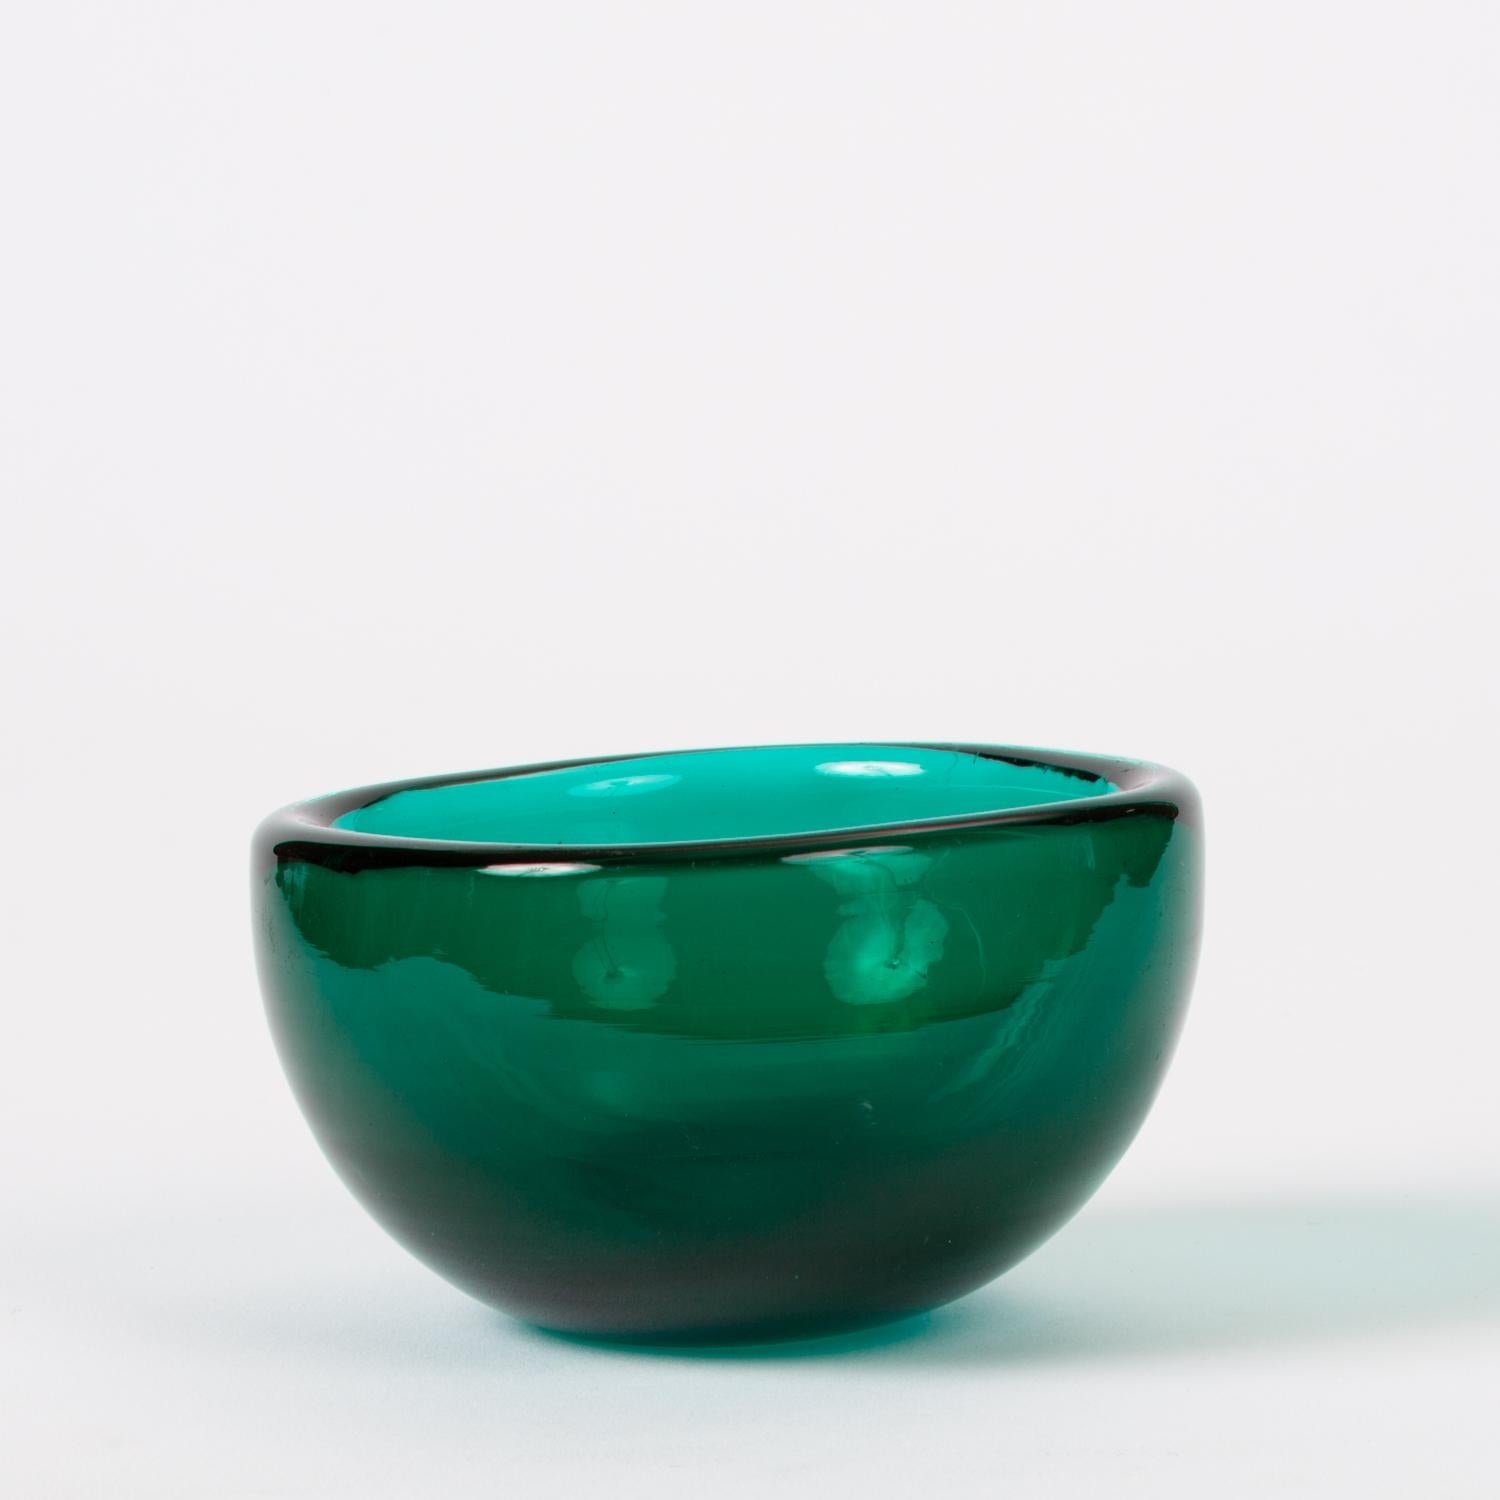 A small Murano glass dish by Venini, in a design commonly attributed to Carlo Scarpa, the company’s artistic director in the 1930s and early 1940s. This modest bowl has four slightly bowed sides and rounded corners. The deep teal blue glass is